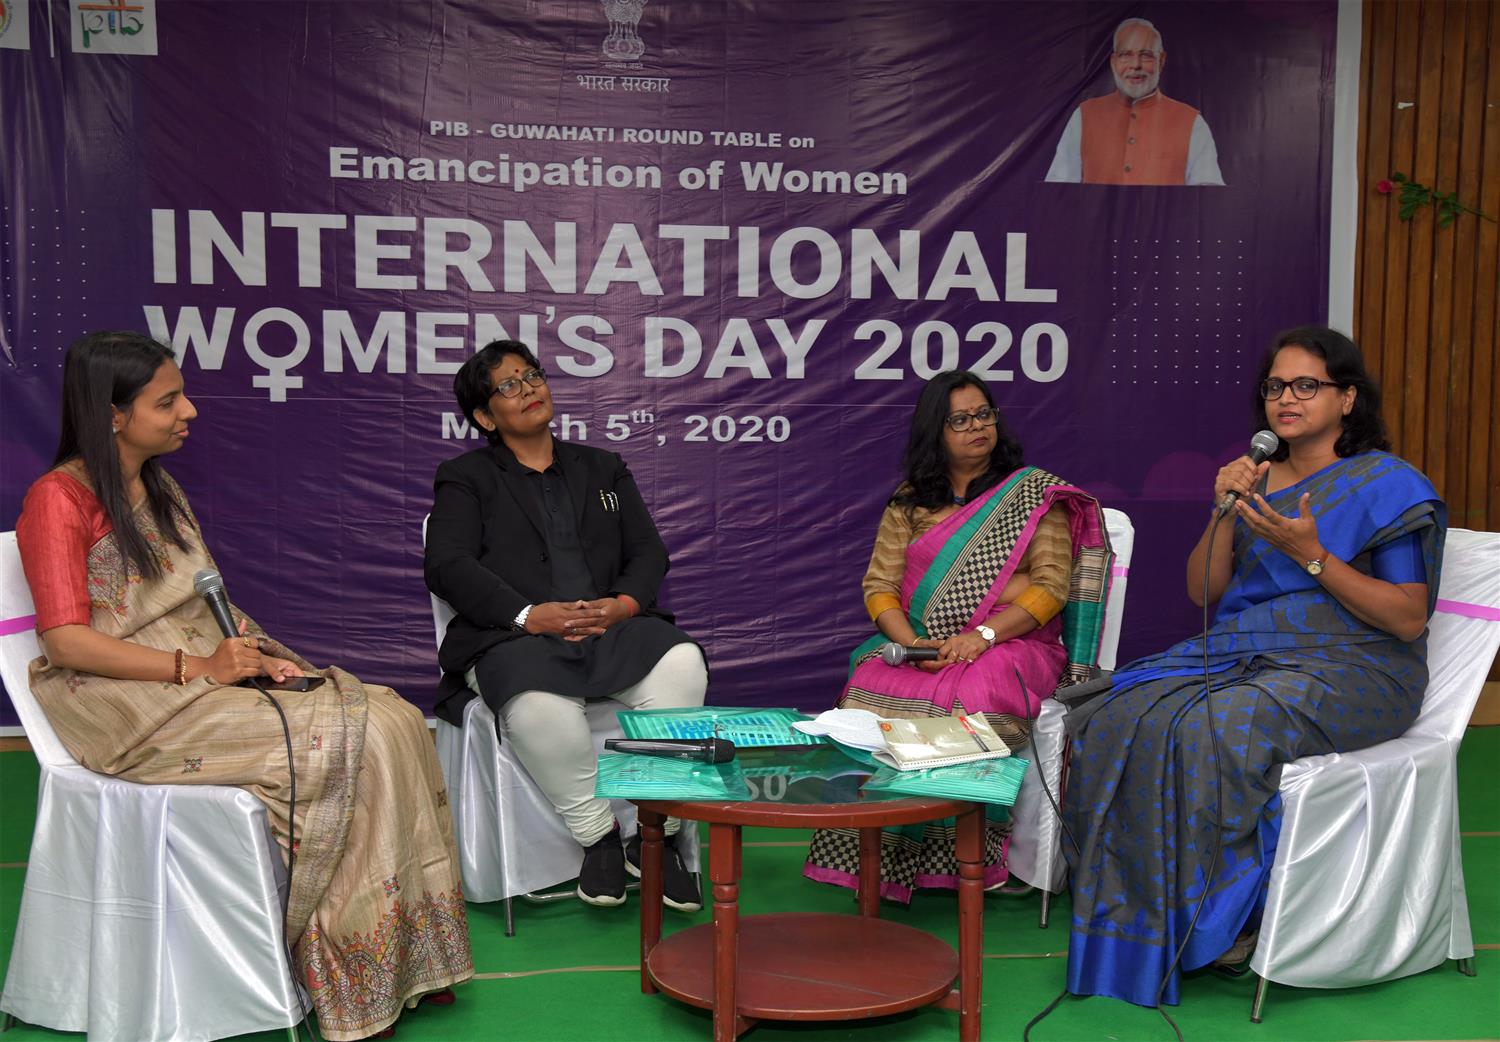 Smt. Sumitra Sharma, Advocate Smt. Mili Hazarika, Senior Advocate Smt. Durba Dutta Lecturer, Royal Golobal University and Dr. Rajshree Bedamatta Associate Prof.IIT, Guwahati and keeriti Tiwari Join Director, PIB Guwahatia are seen at the Round  Table conference  on Women’s Emancipation in the Run-up to International Women’s Day 2020 , organized by Press Information Bureau, Ministry of Information & Broadcasting, Guwahati in collaboration with Indian Institute of Technology, Guwahati on 5th March 2020. 